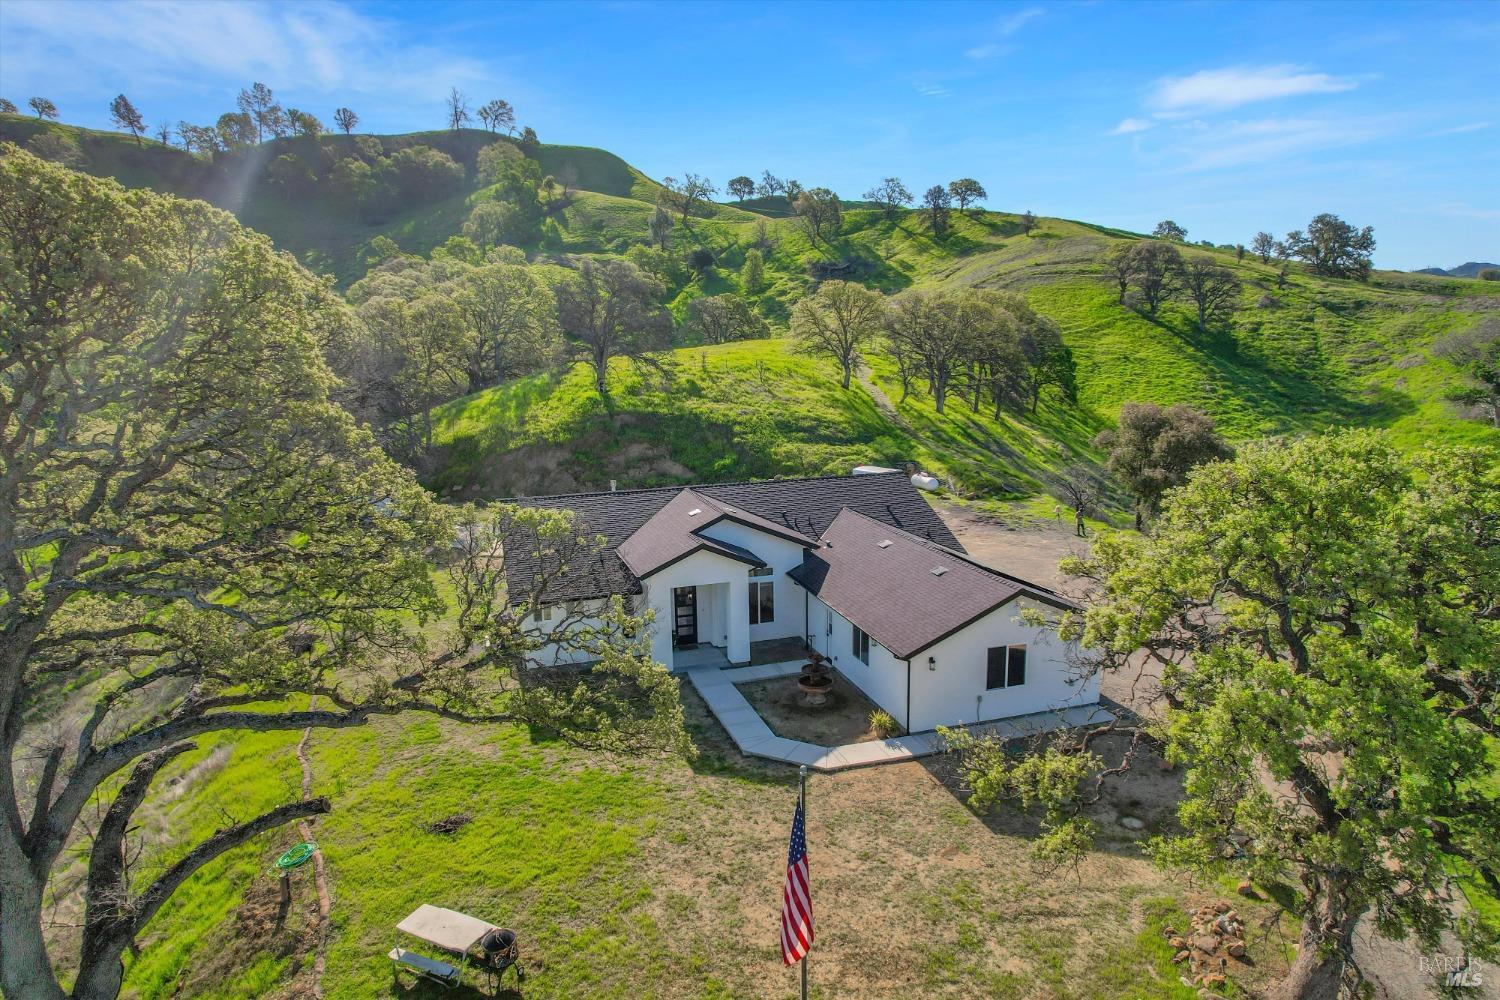 Photo of 8654 Quail Canyon Rd in Vacaville, CA